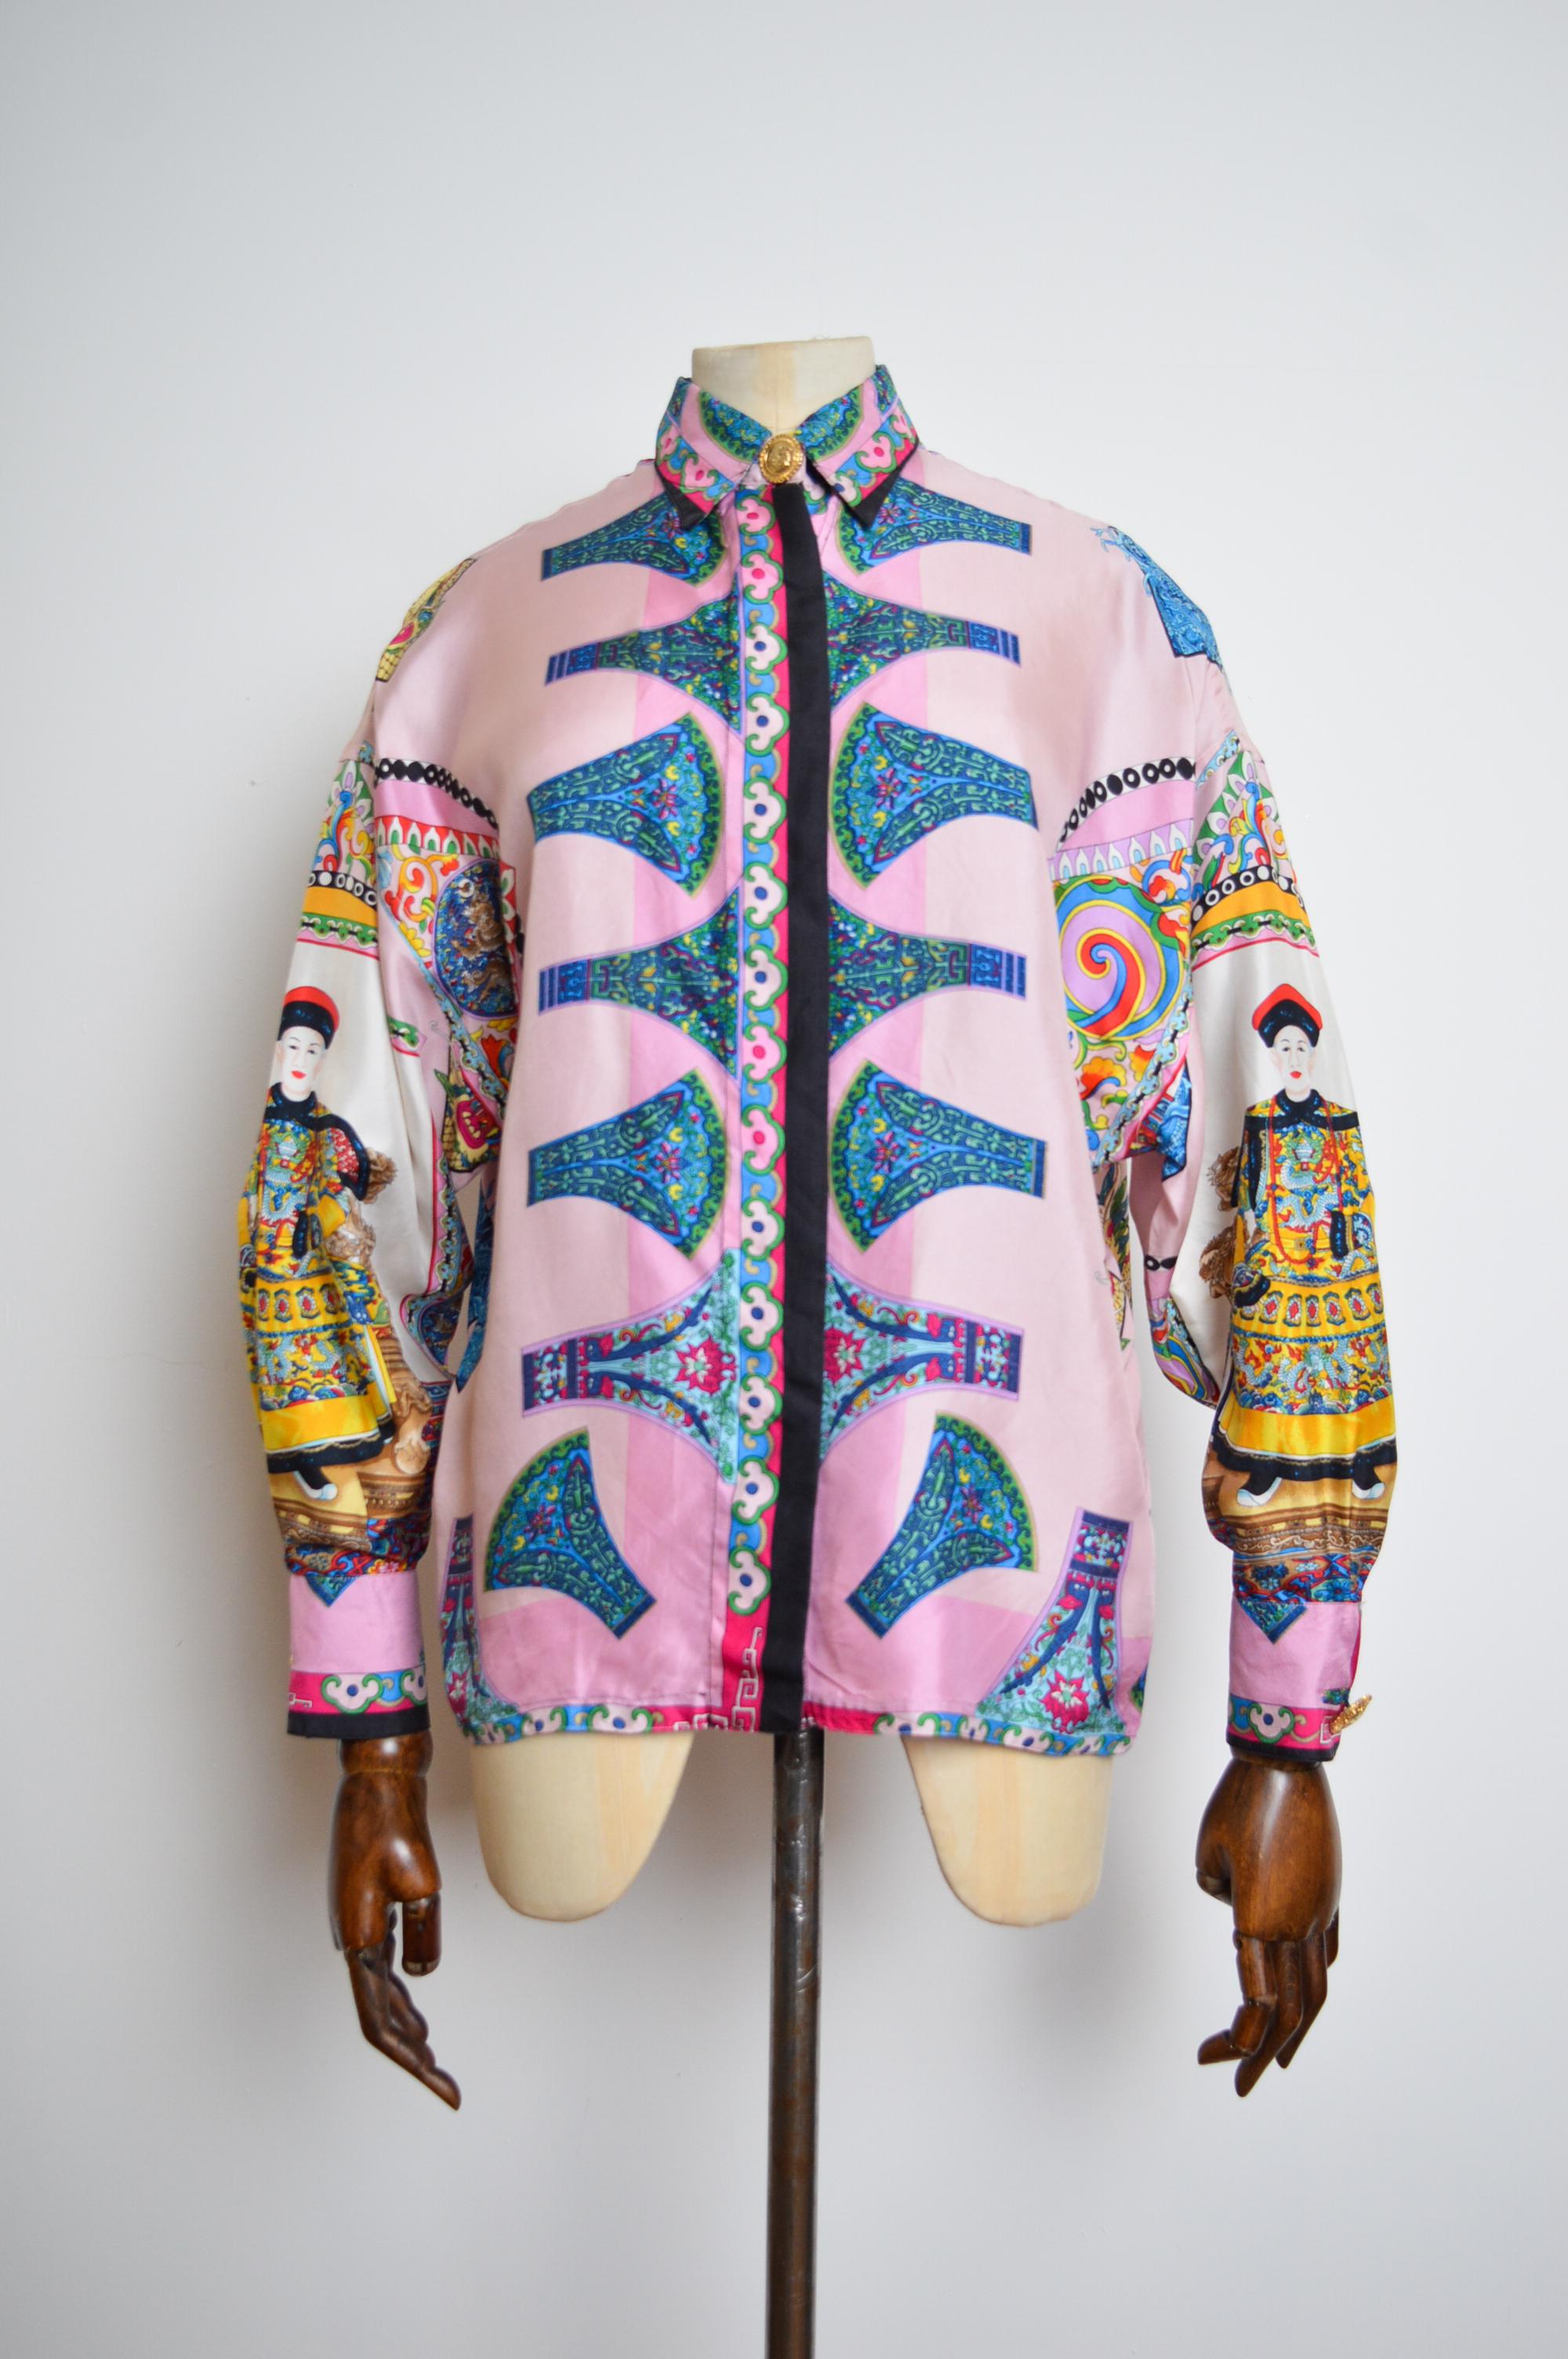 Women's or Men's Gianni Versace 1993 Spring Runway Atelier Pure Silk patterned Colourful Shirt